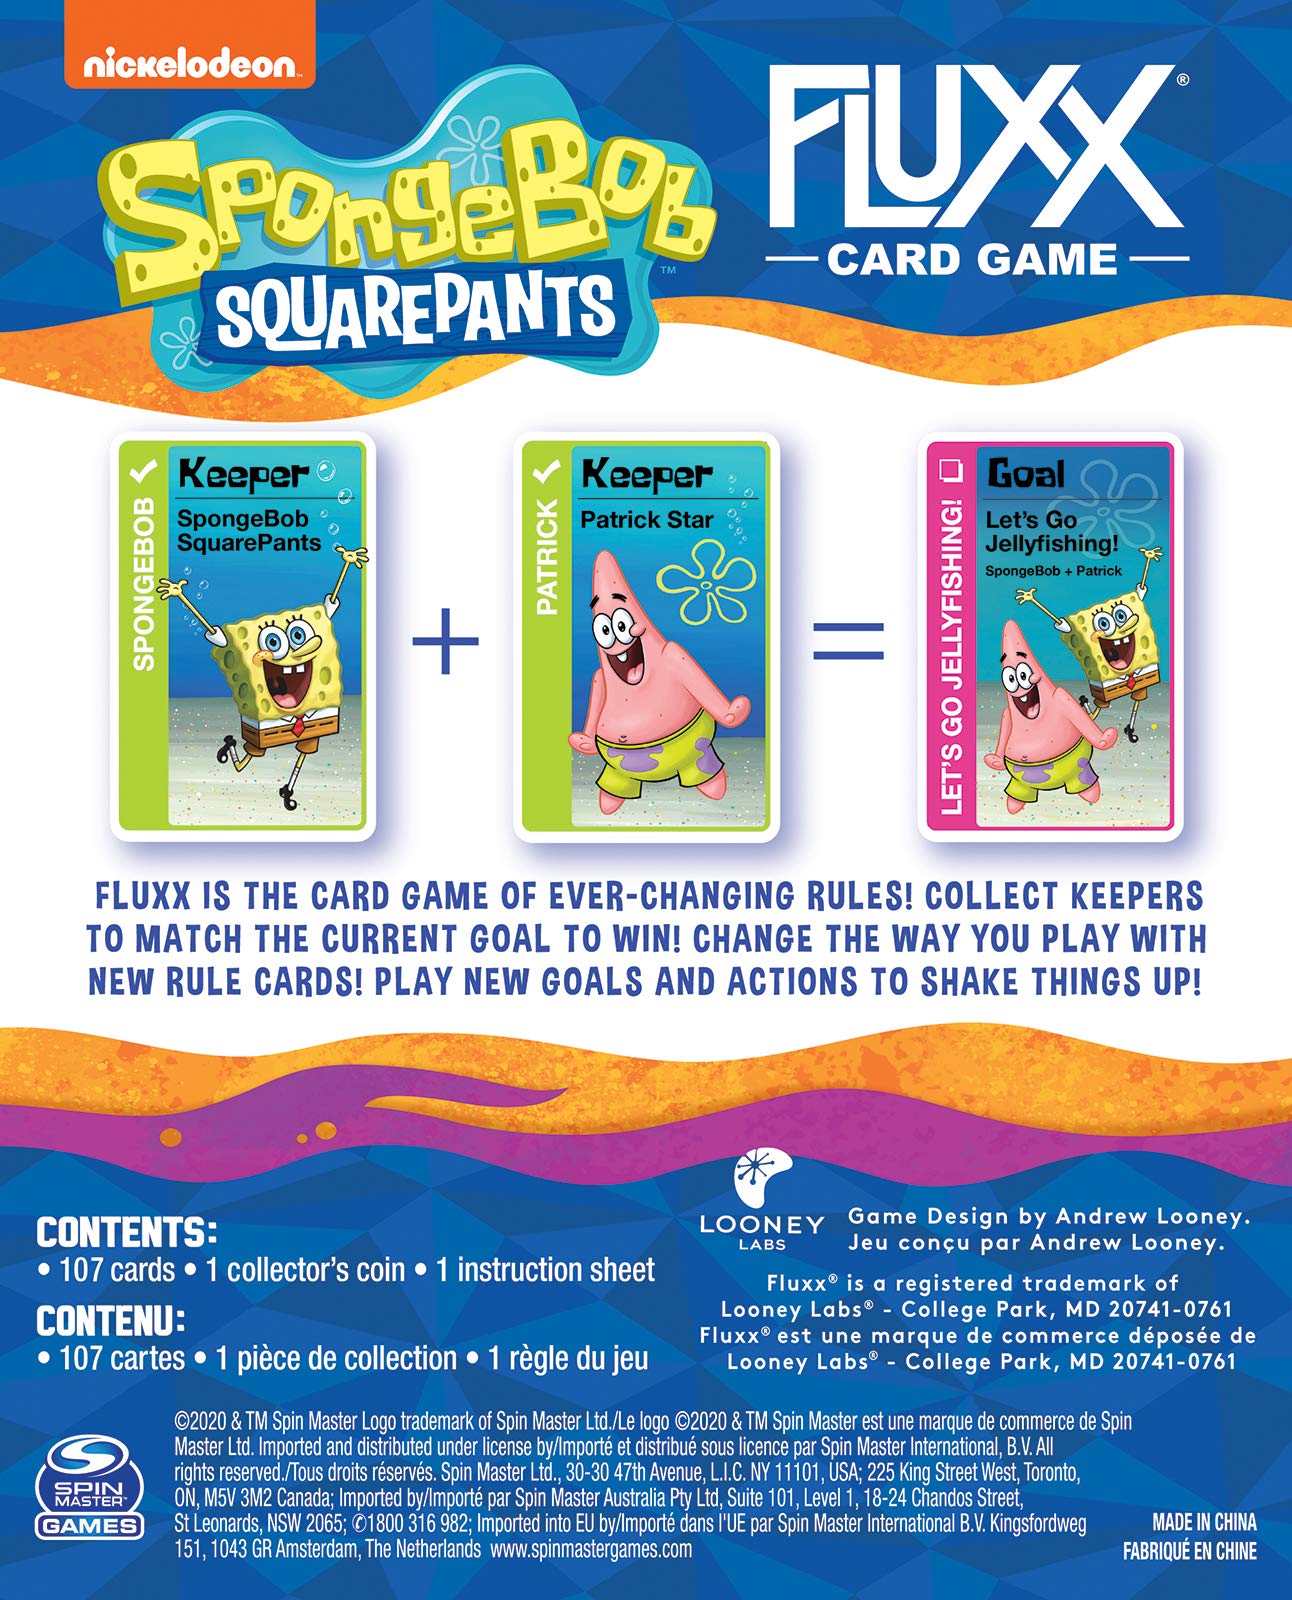 LOONEY LABS Spongebob Fluxx Game - Spongebob Card Game Card Games for Kids and Adults Fun Games Party Games Kids Games Best Card Games for Adults Games for Family Game Night 2-6 Player Games